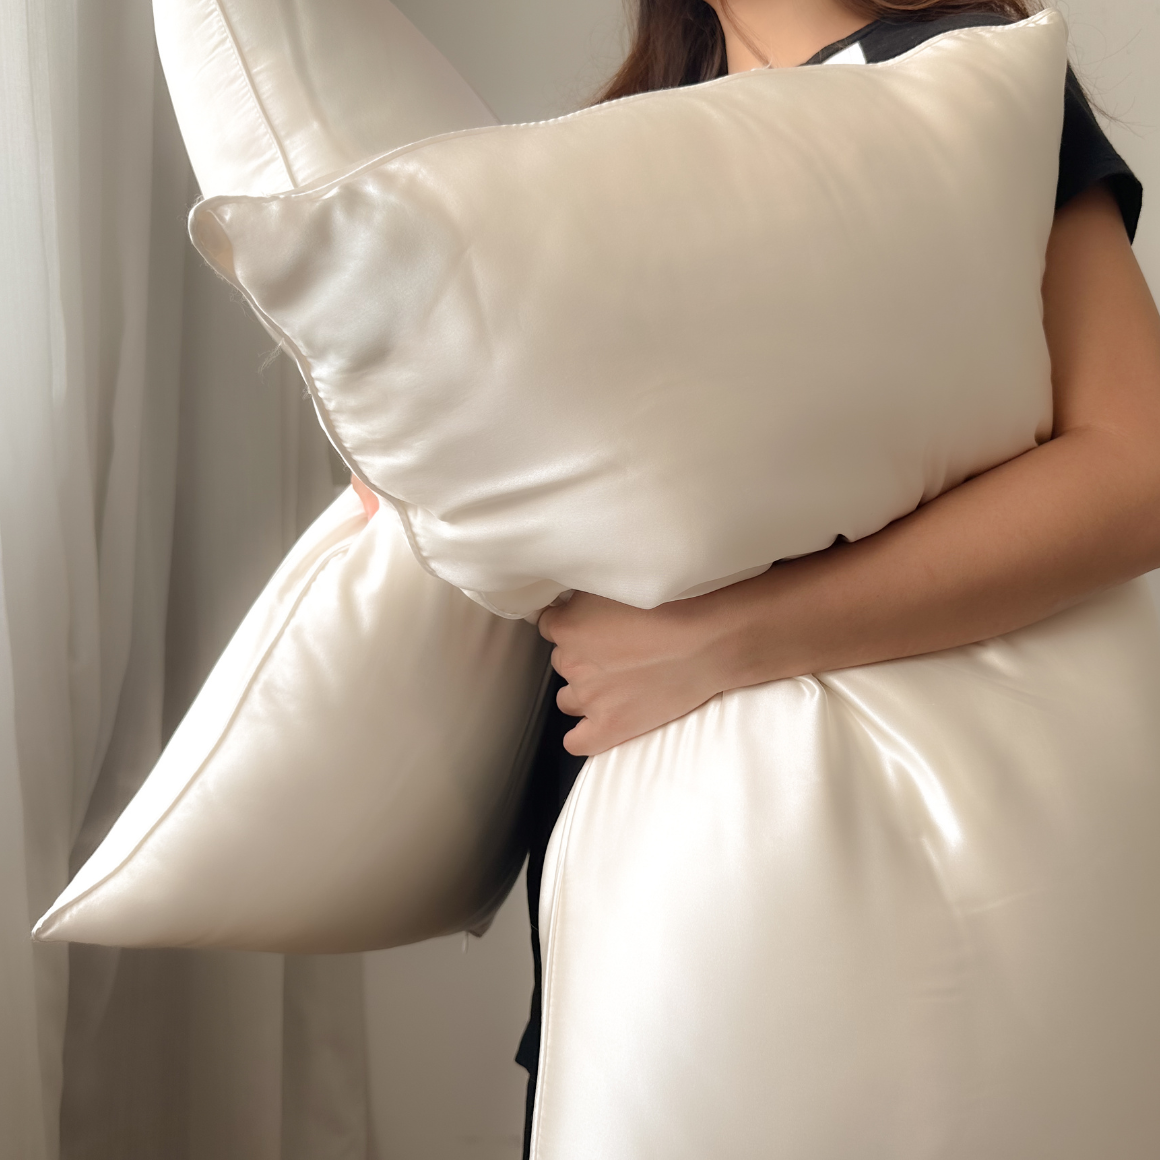 Best hypoallergenic silk pillow for sleep. Filled with 100% Silk Floss inside a layer of Feather Silk Cotton. Singapore Weavve Home Silk Pillow Collection.